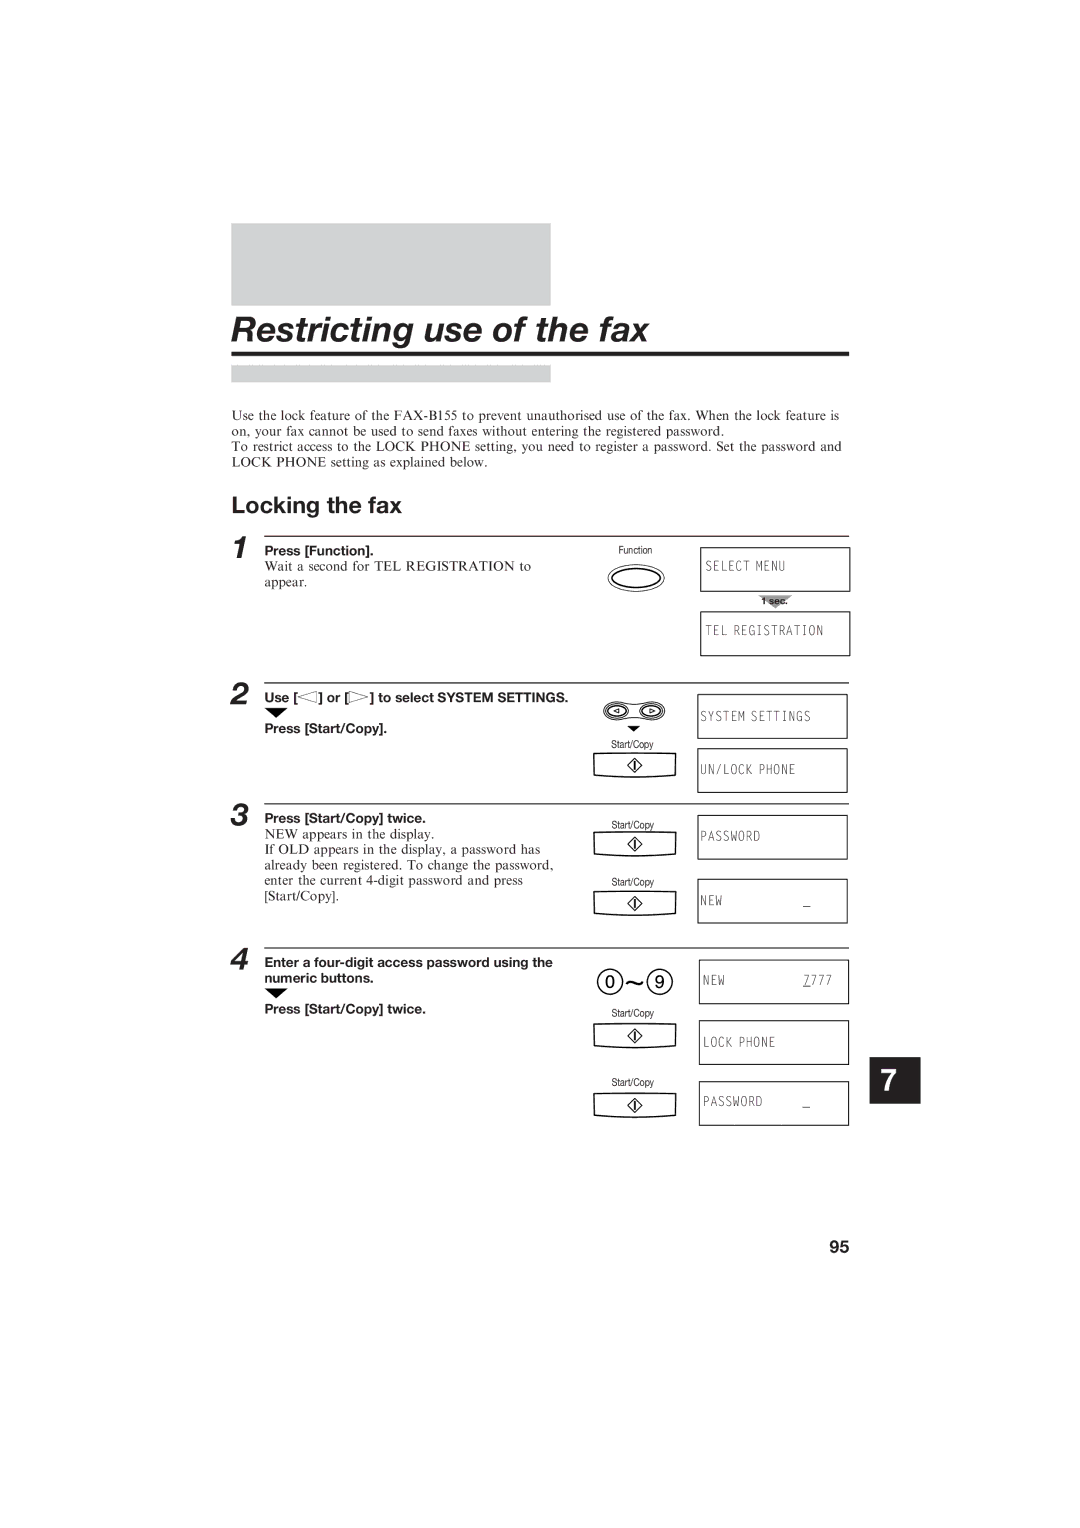 Canon B155 manual Restricting use of the fax, Locking the fax, Use or to select System Settings 